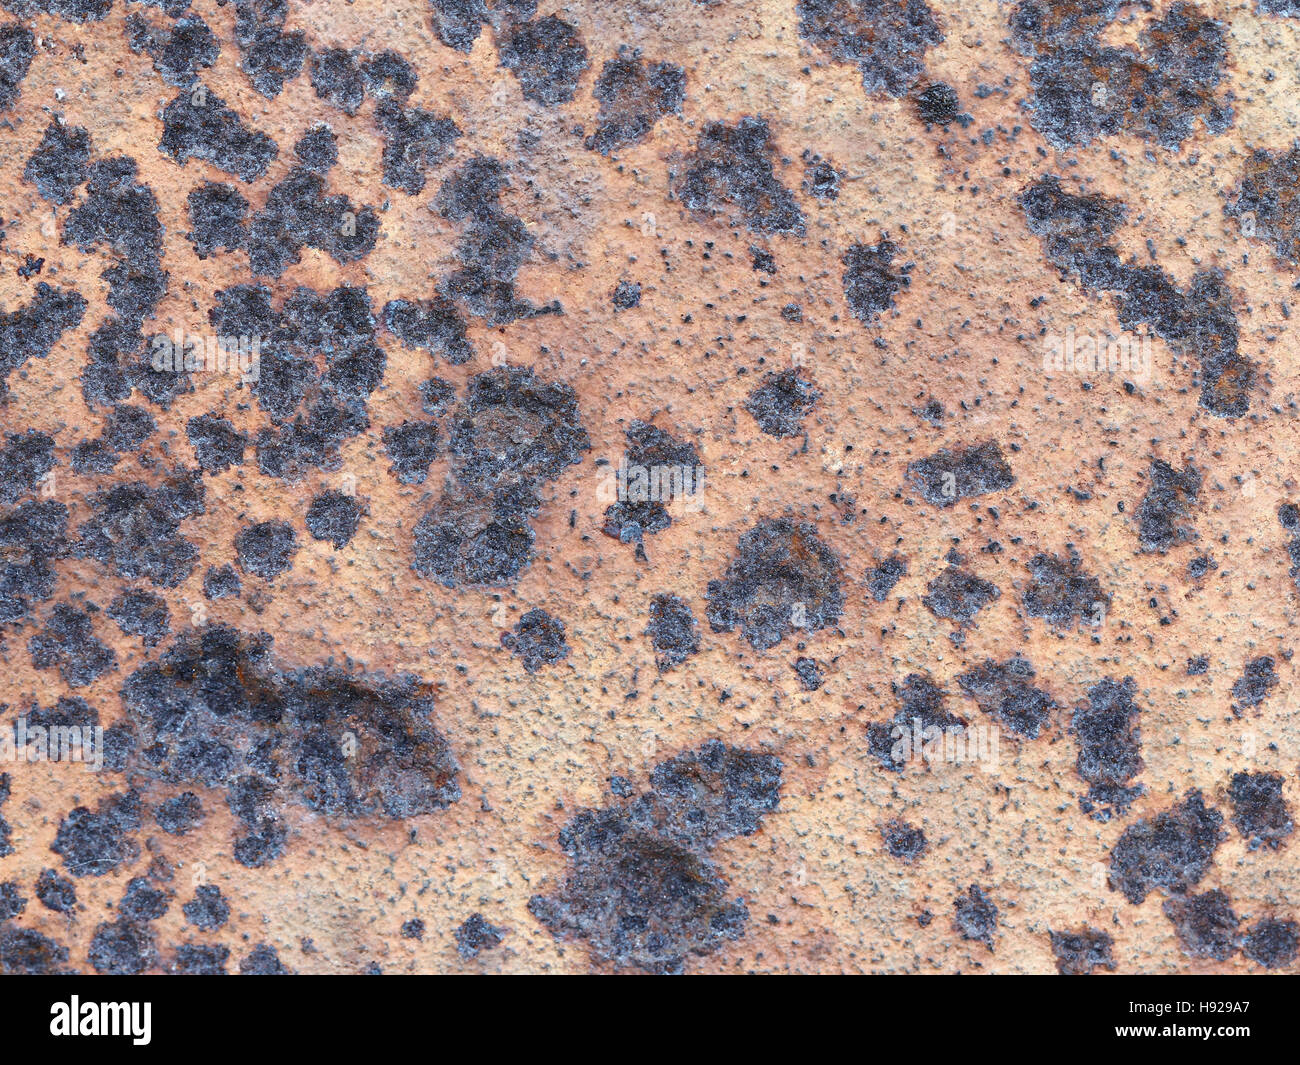 Corroded and worn surface of the iron plate Stock Photo